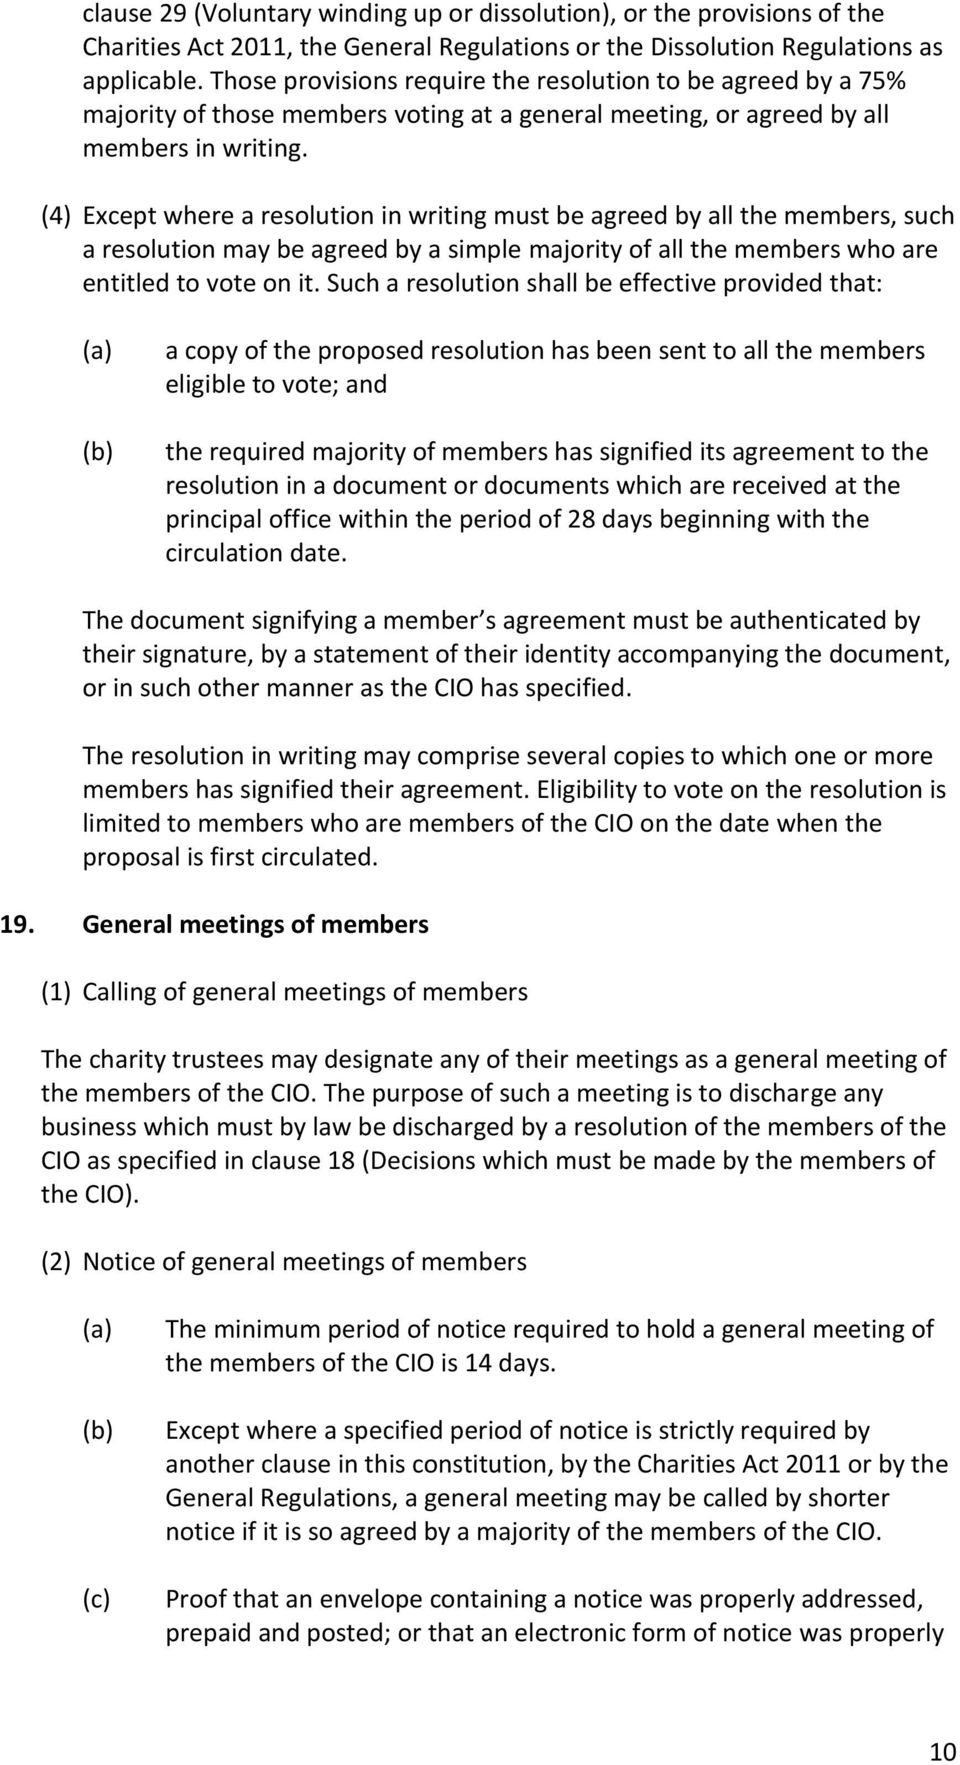 (4) Except where a resolution in writing must be agreed by all the members, such a resolution may be agreed by a simple majority of all the members who are entitled to vote on it.